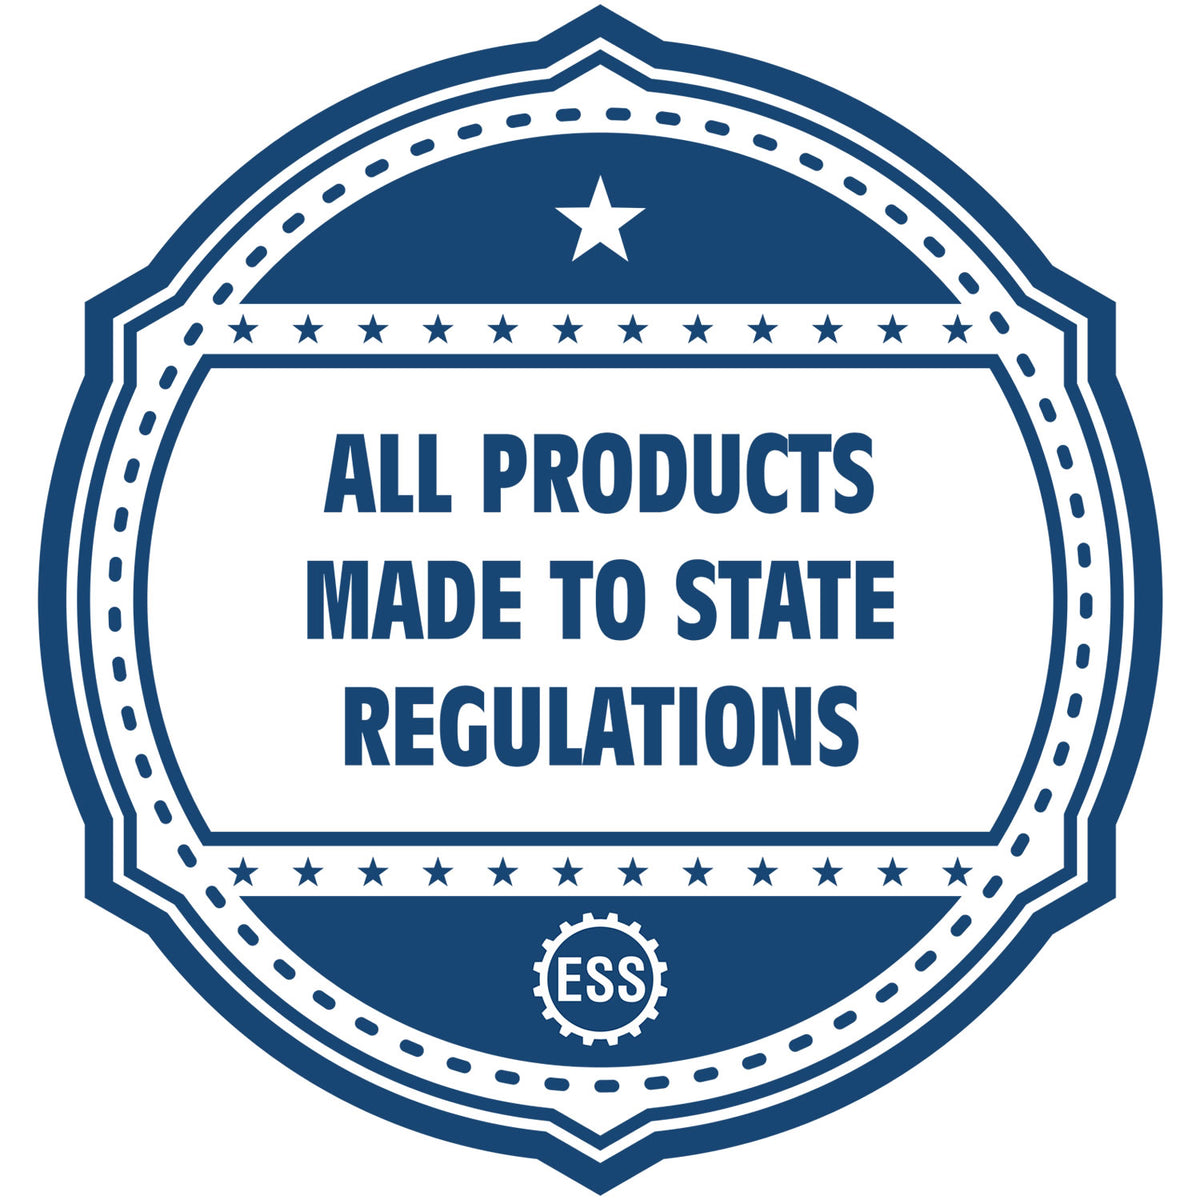 An icon or badge element for the Premium MaxLight Pre-Inked Maryland Engineering Stamp showing that this product is made in compliance with state regulations.